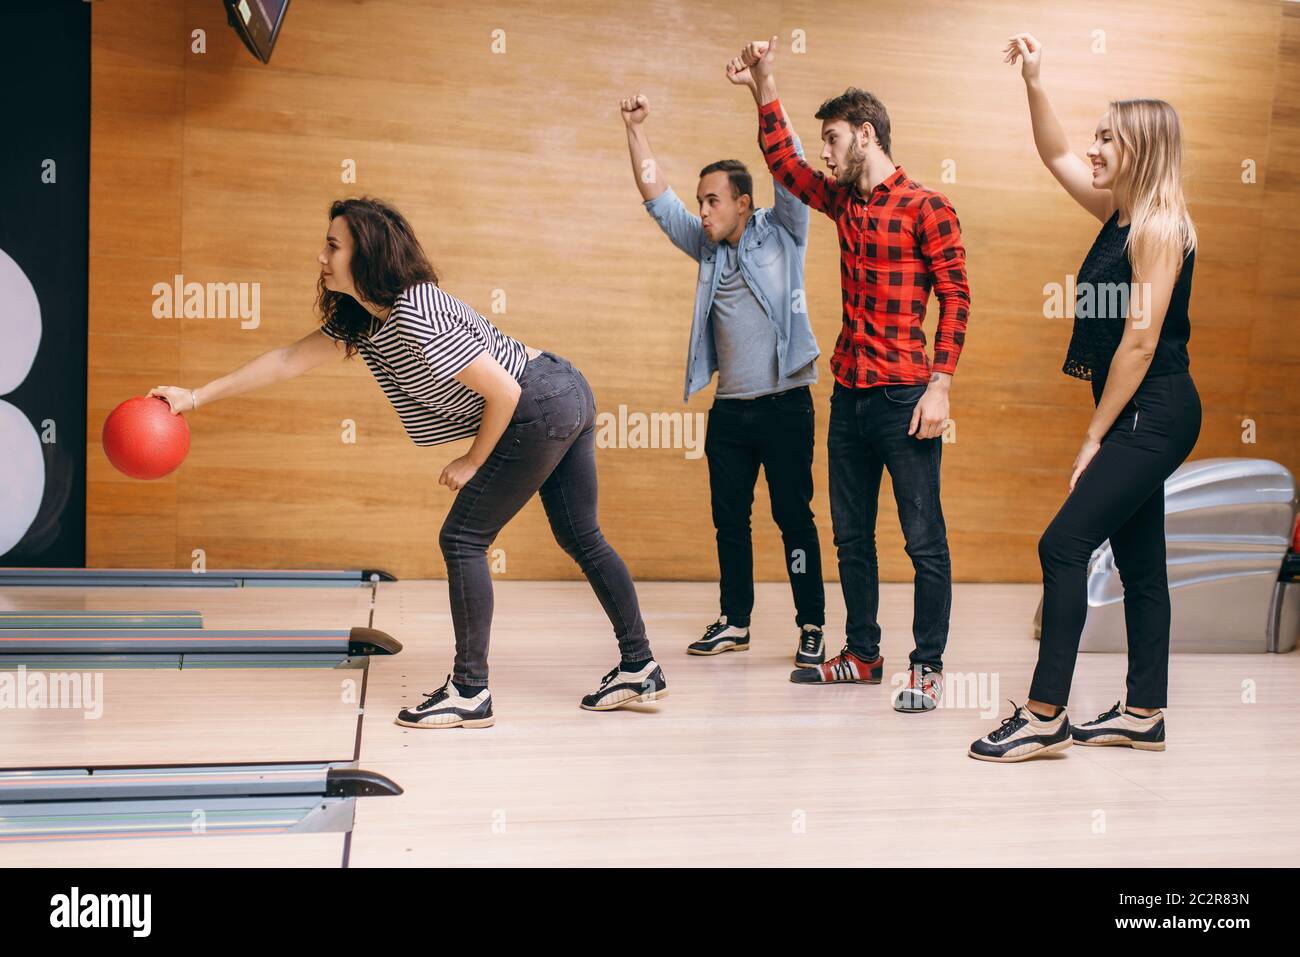 Female bowler on lane, ball throwing in action, strike shot preparation. Bowling alley teams playing the game in club, active leisure Stock Photo